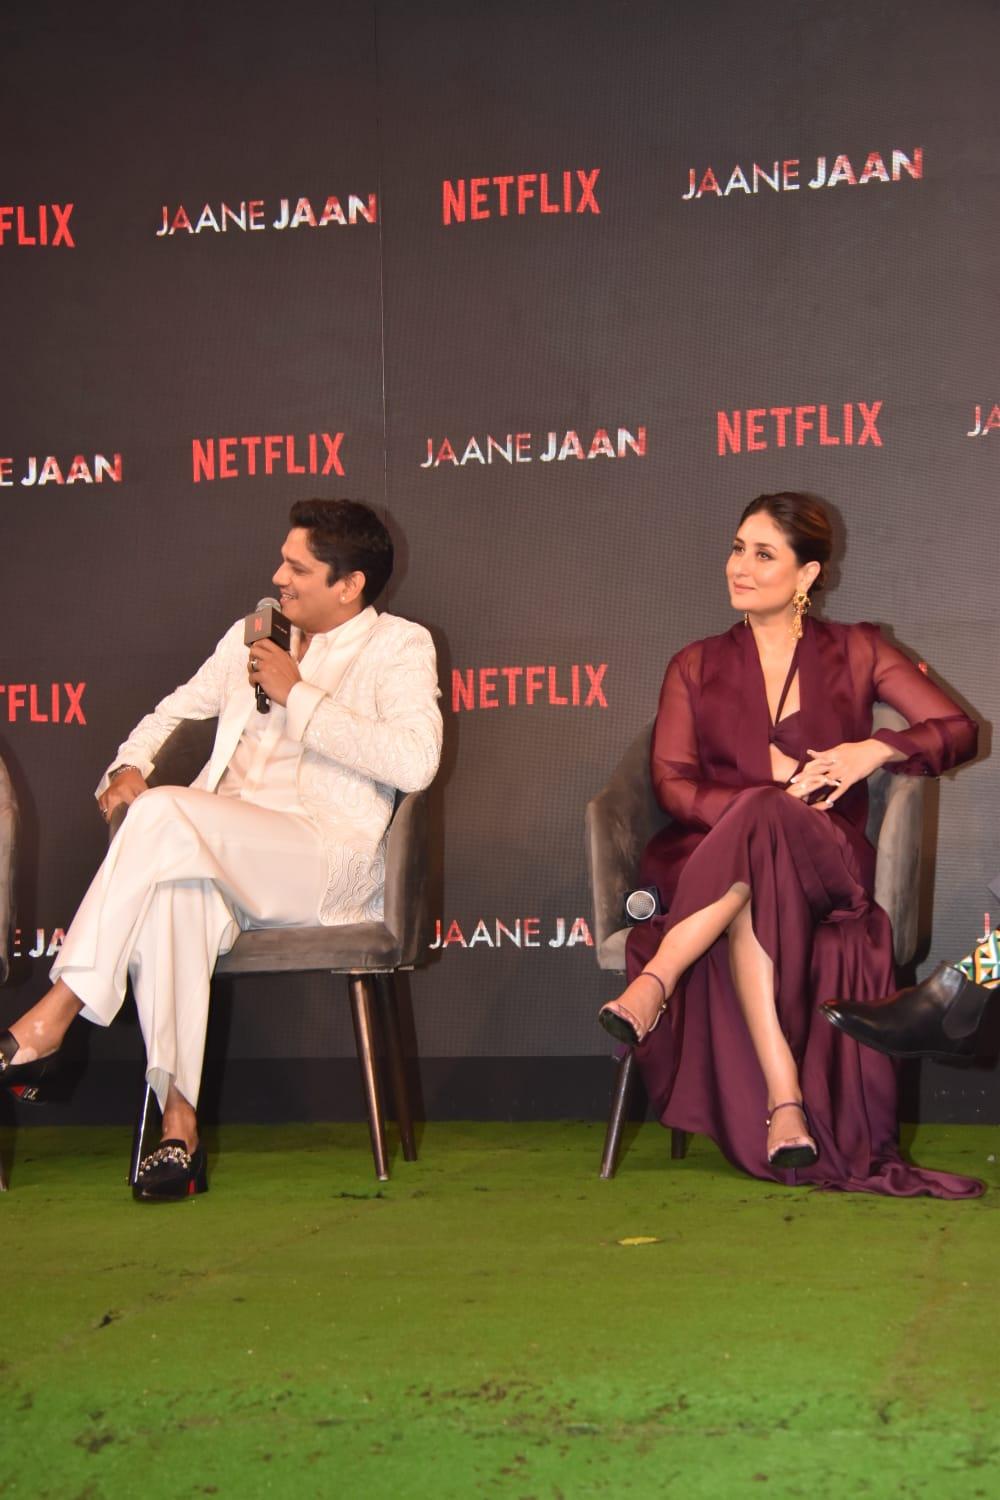 Talking about the trailer launch of the film, Director and Writer, Sujoy Ghosh says, “I am so excited that the audiences finally get to see a glimpse of Jaane Jaan, a film extremely close to my heart.